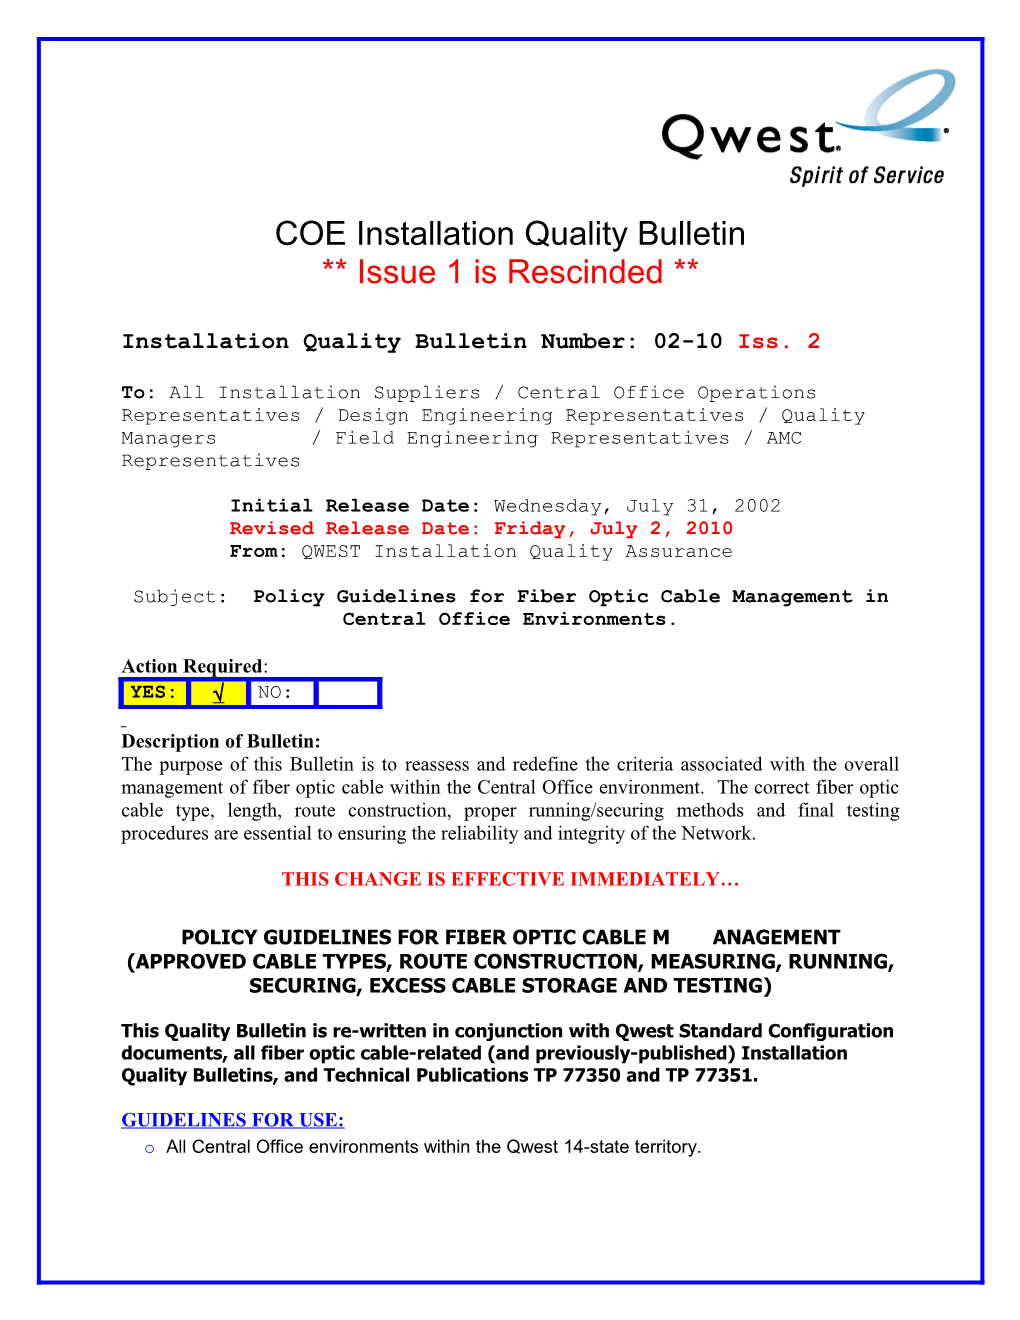 Installation Quality Bulletin Number: 02-10 Iss. 2